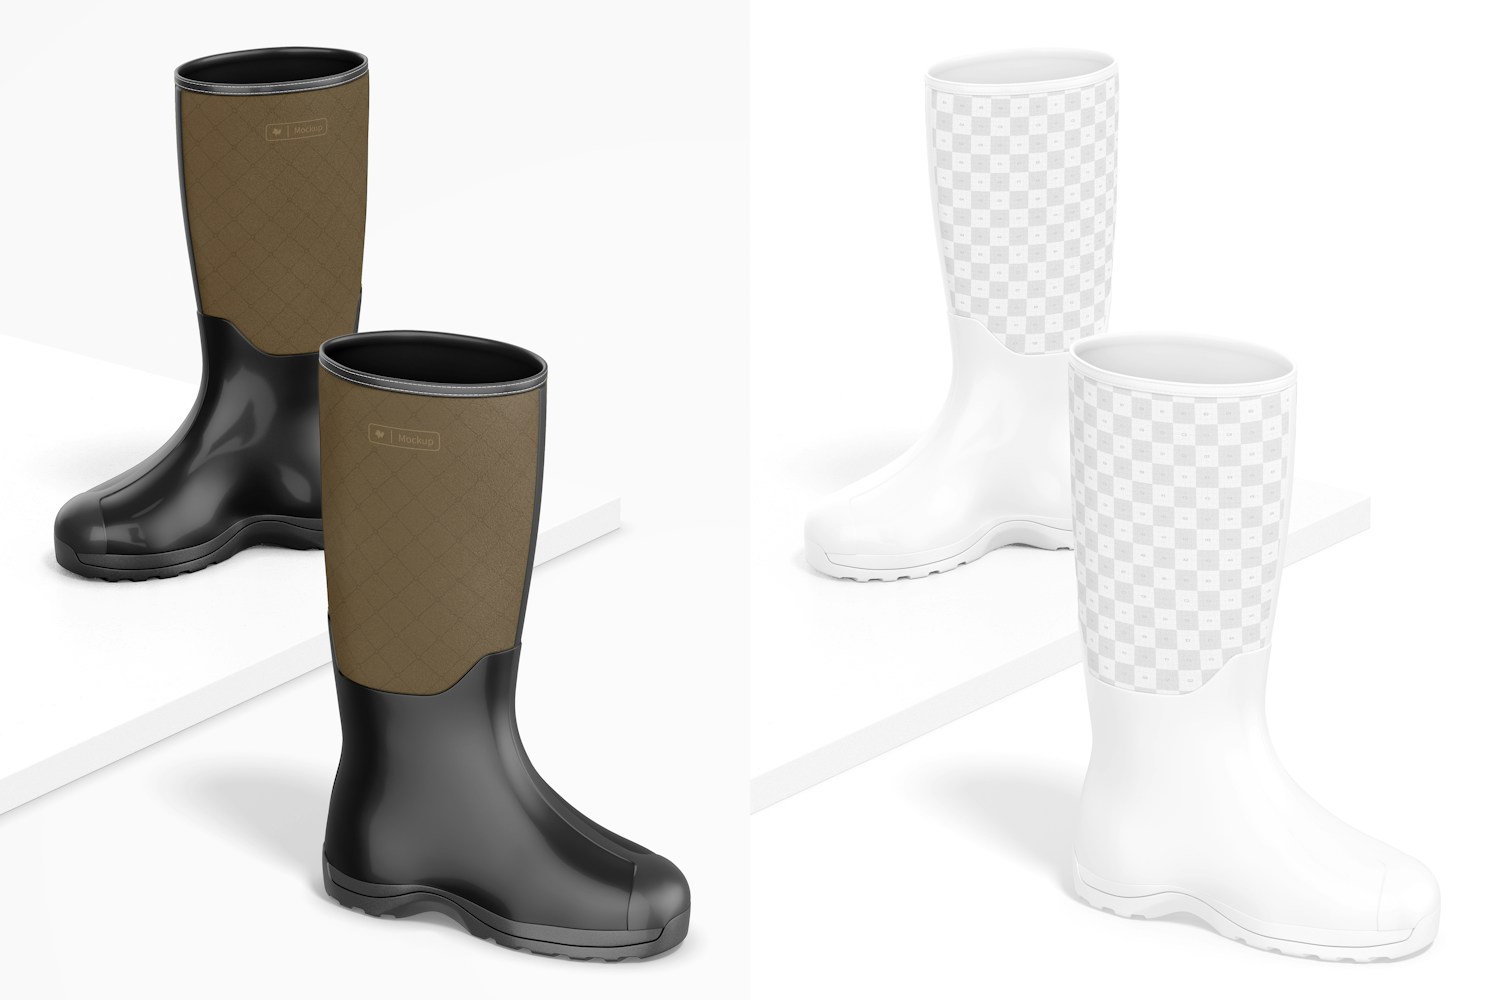 Rubber Boots Mockup, Perspective View